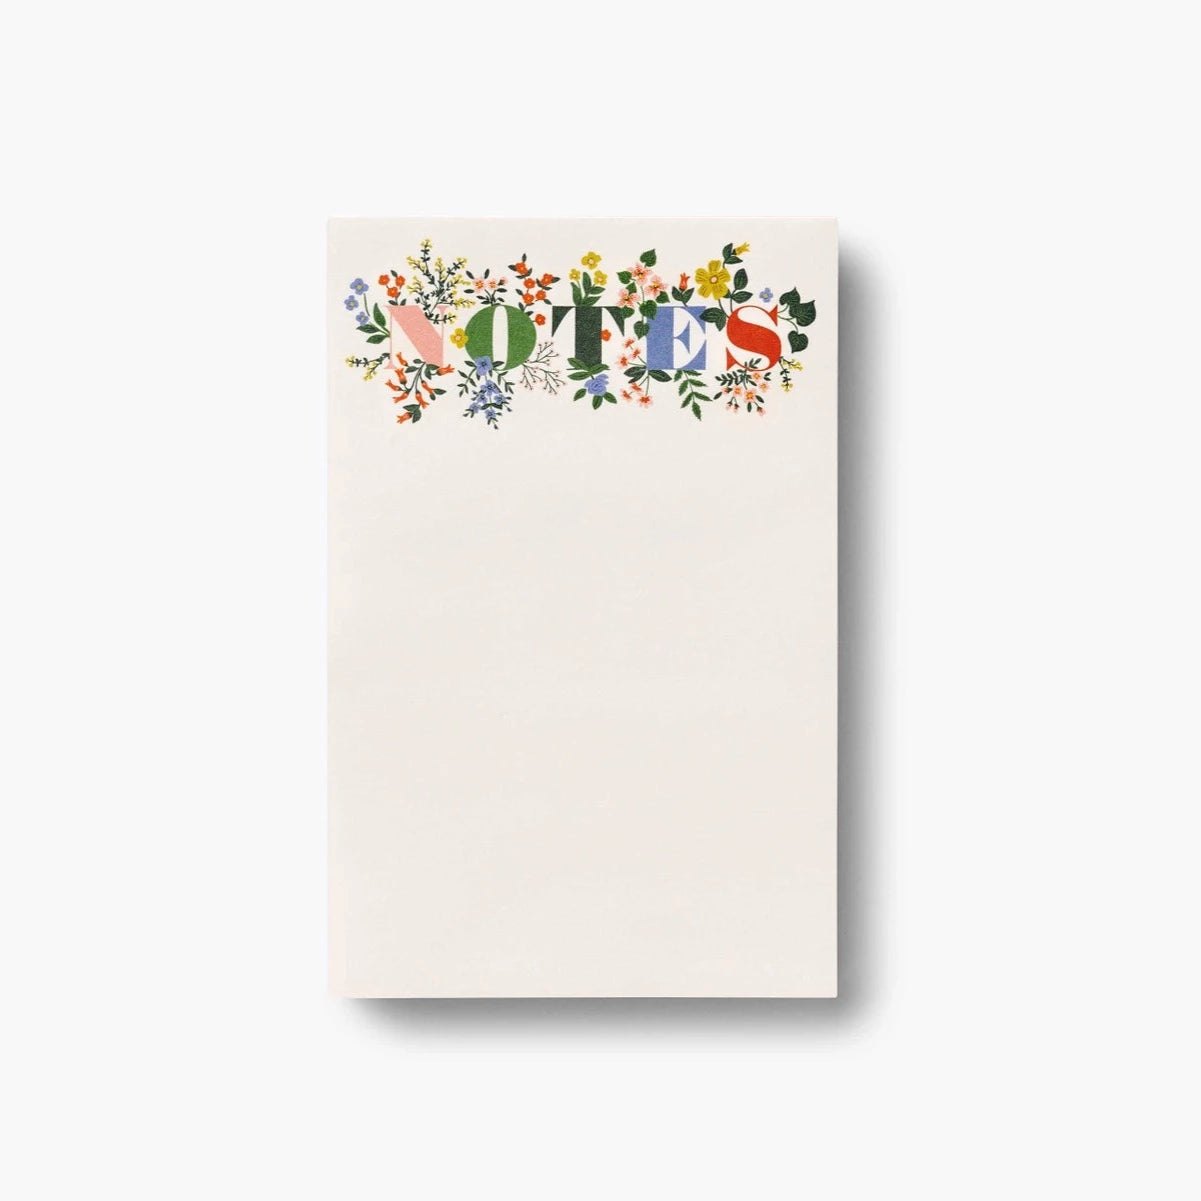 white notepad with signature floral accentuating the word "NOTES" at the top!